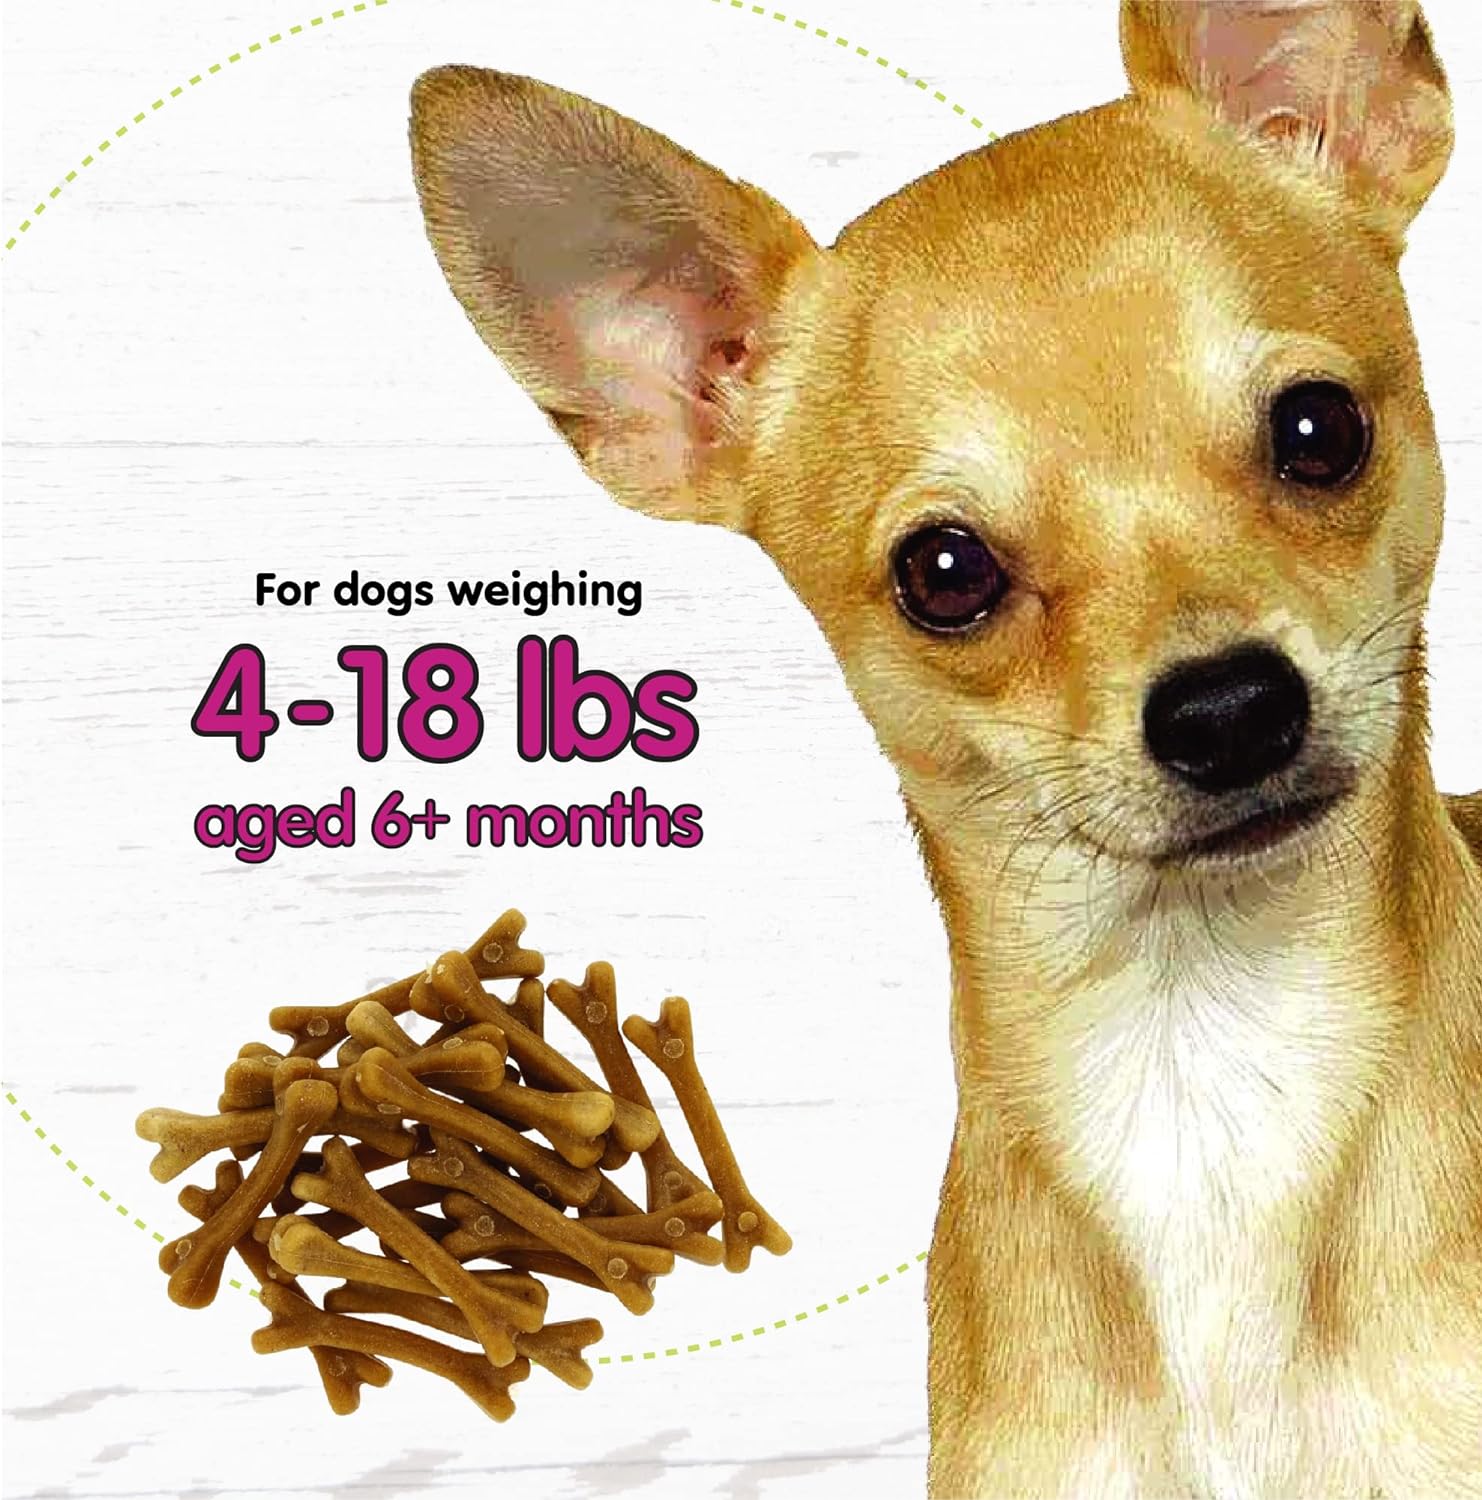 FIDO NATURALS Belly Bones for Dogs, 100 Yogurt Flavor Mini Dog Dental Treats(100 Count) - Made in USA - for Extra Small Dogs - Plaque and Tartar Control for Fresh Breath, Digestive Health Support : Pet Supplies